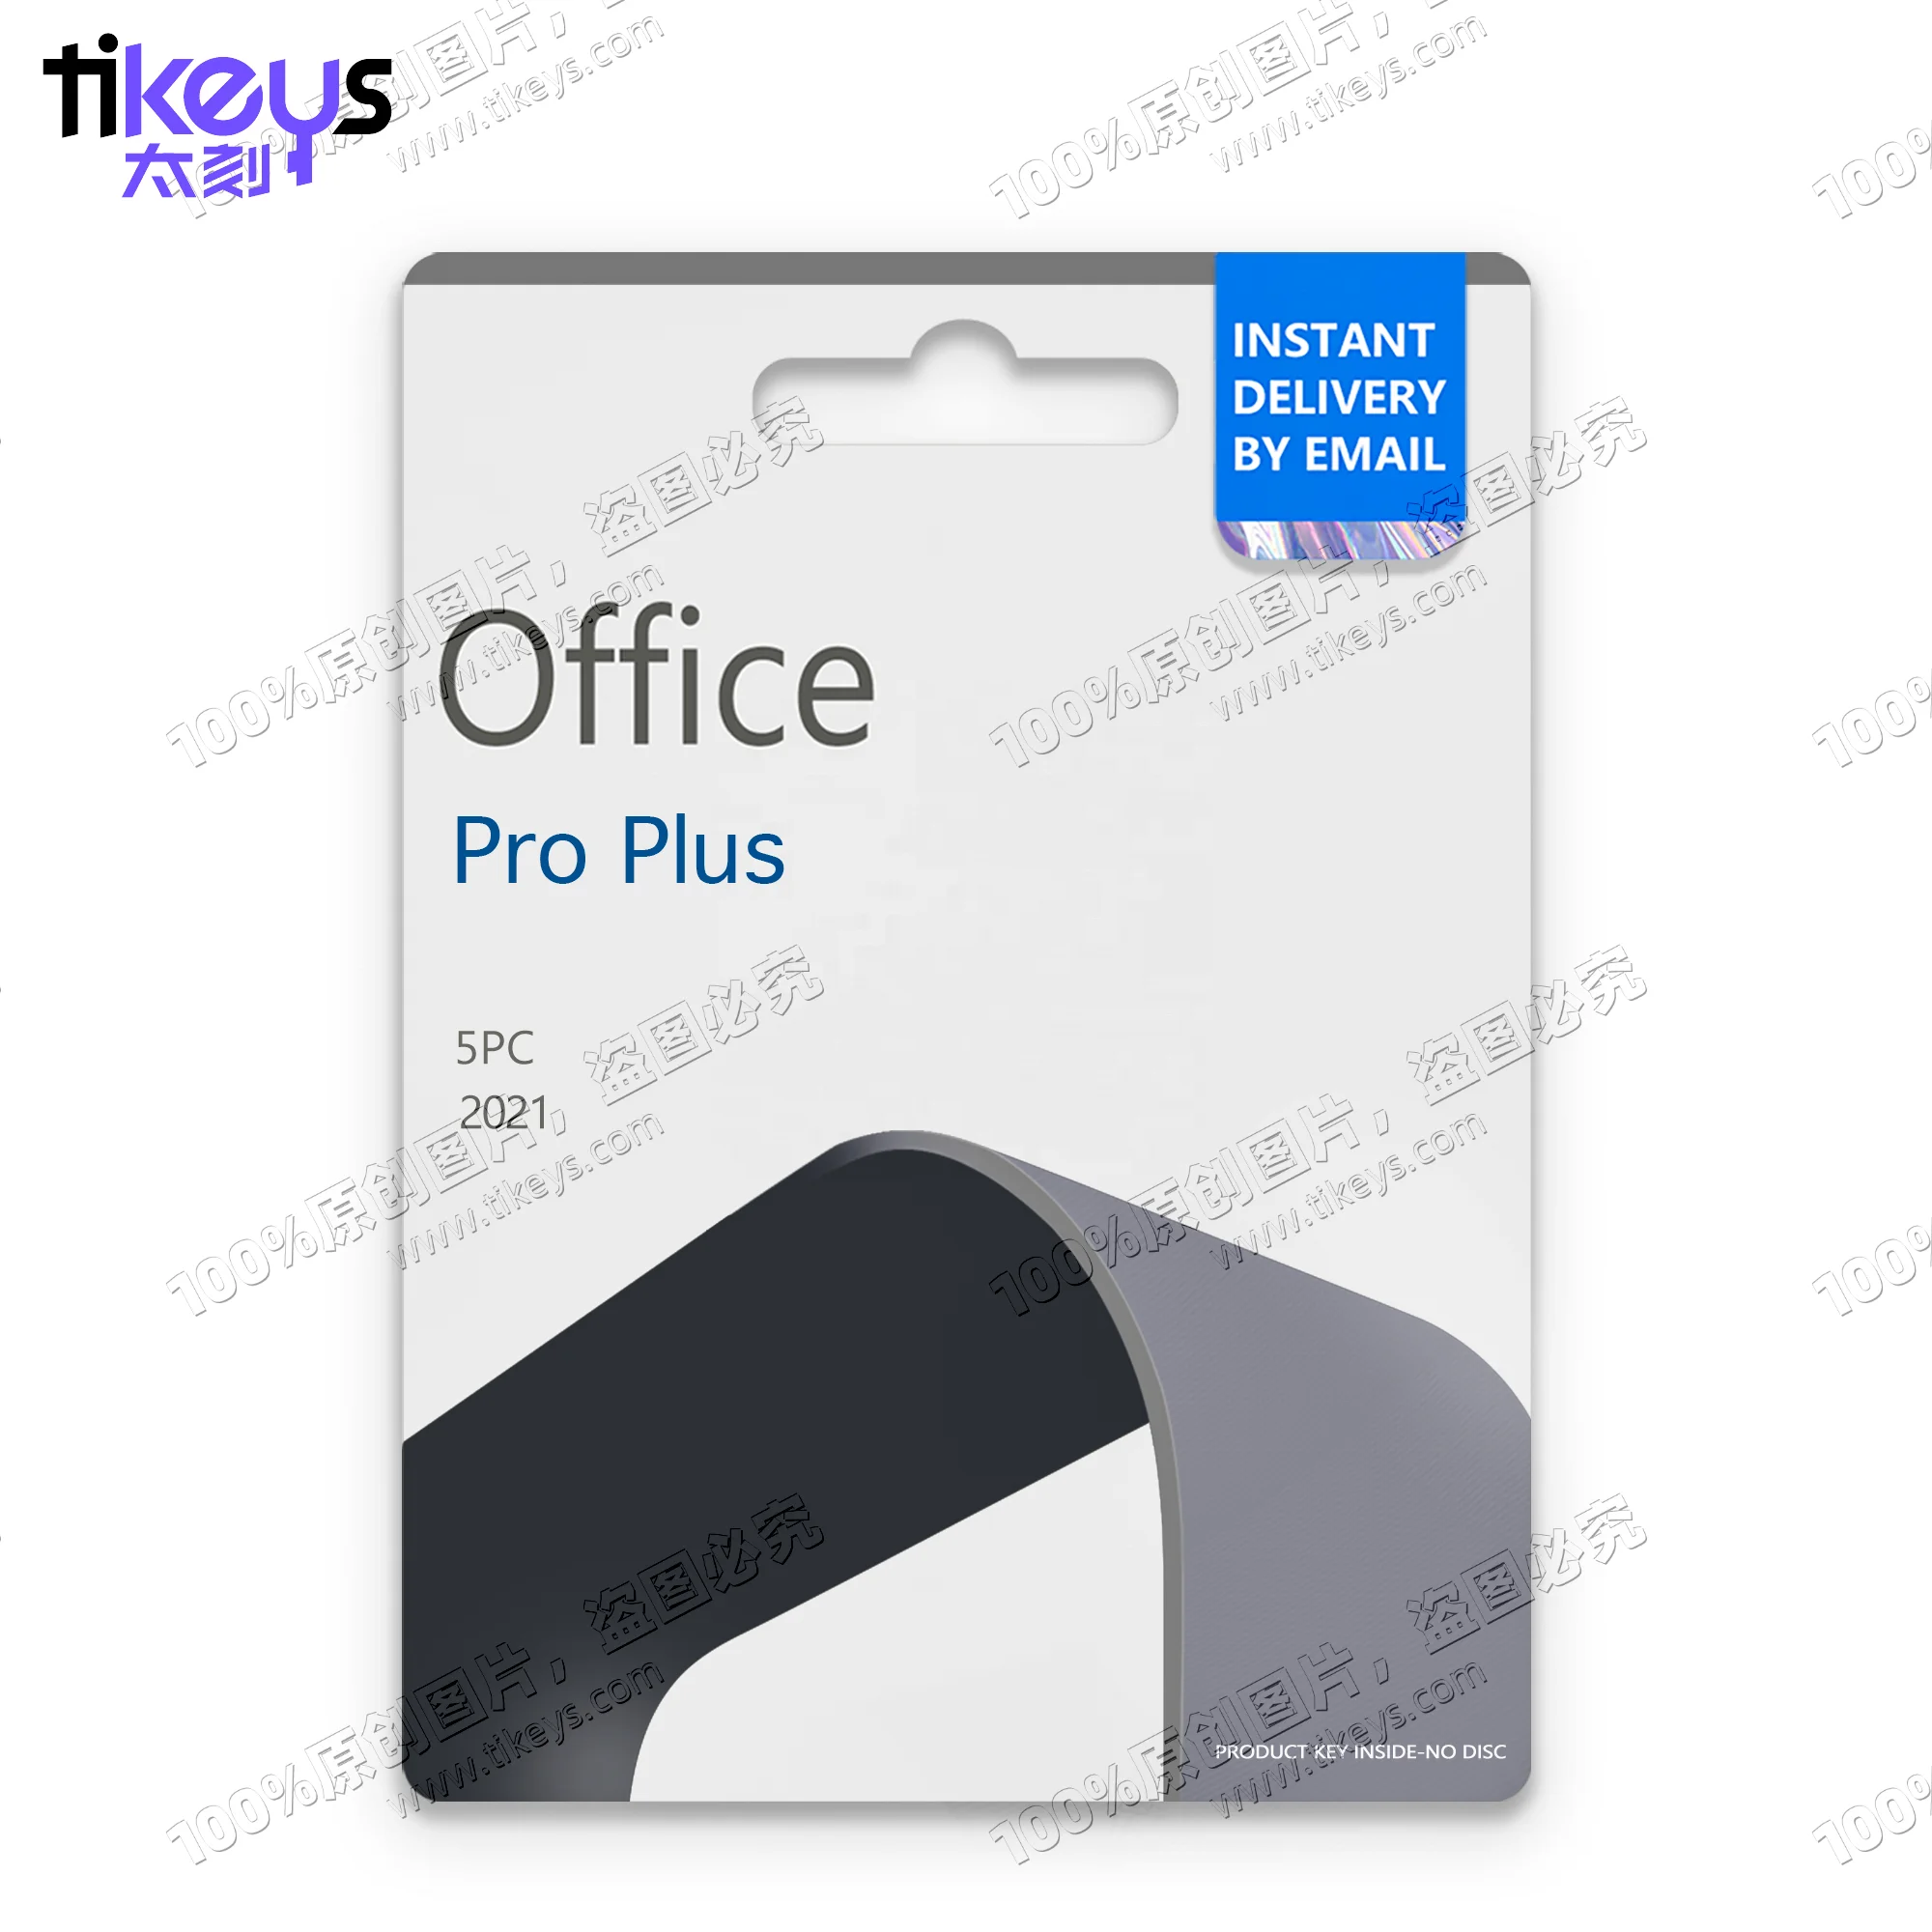 24/7 Online Email Delivery Office 2021 Pro Plus Key 5 PC PP Genuine Retail License Code 100% Online Activation